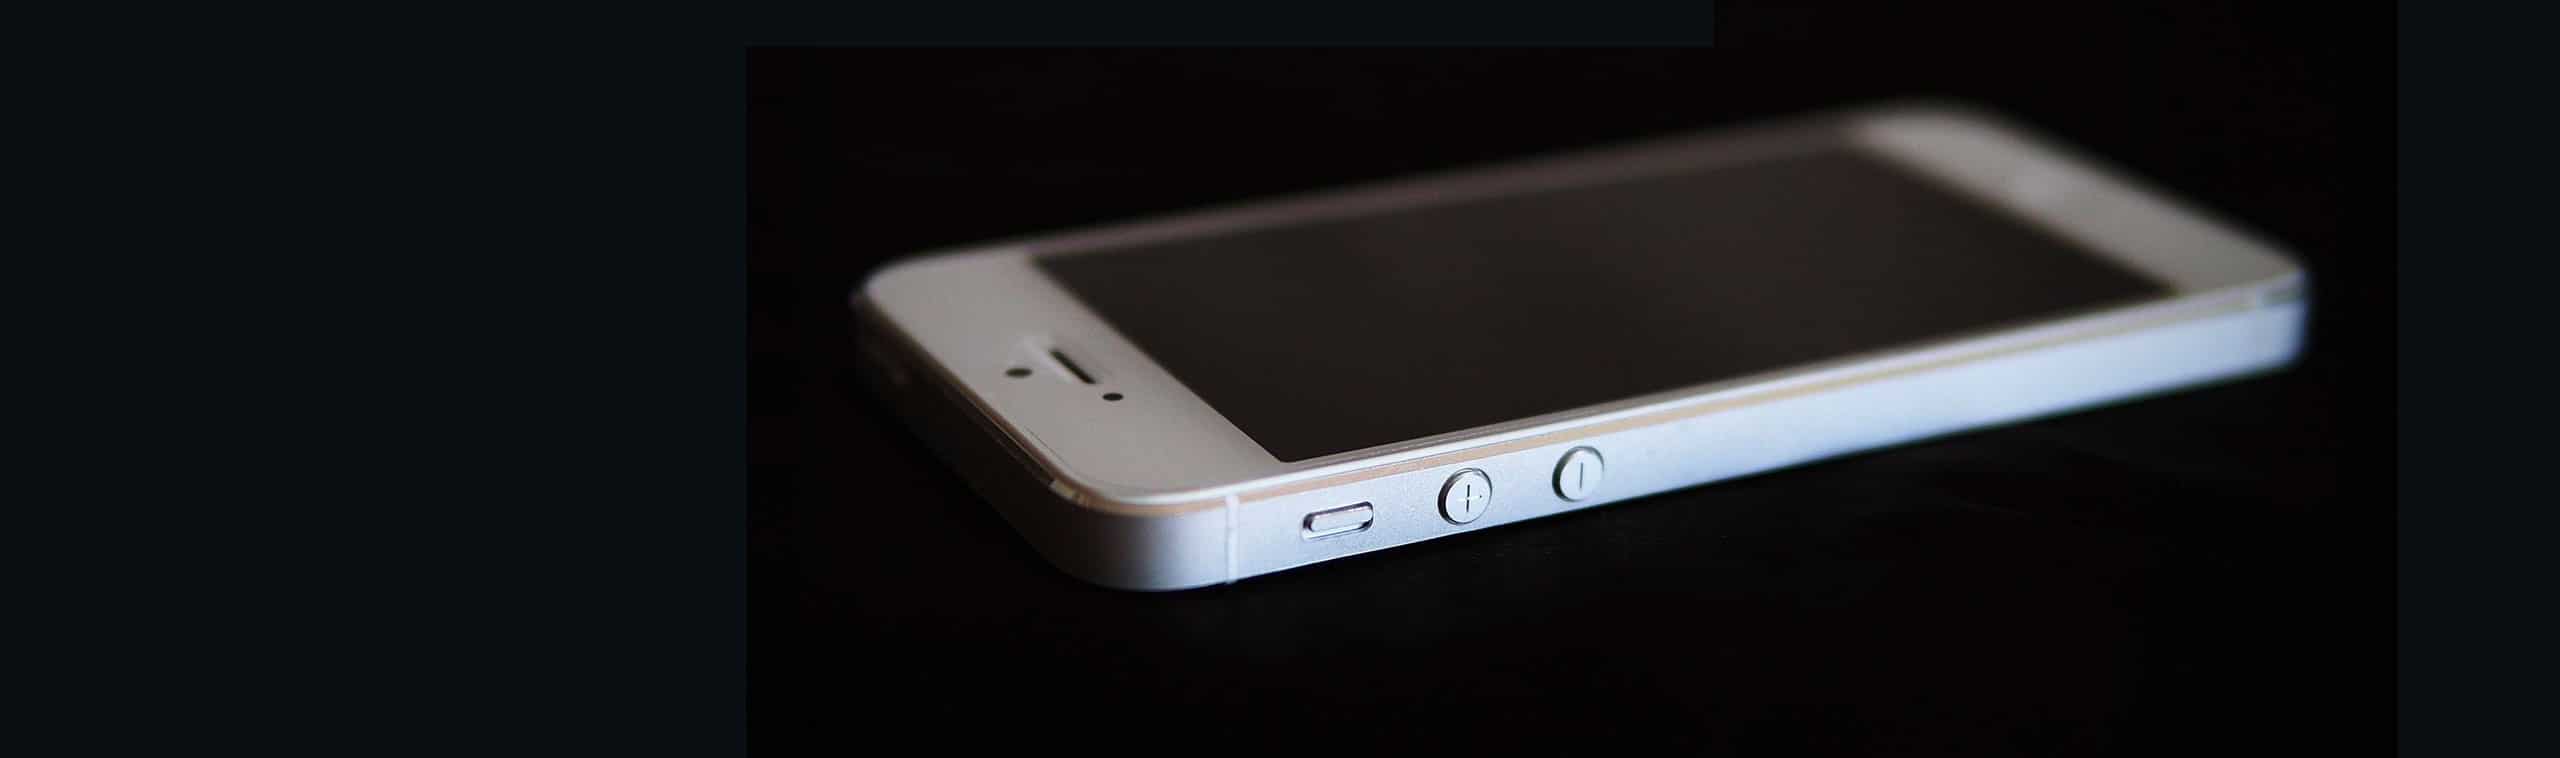 an iPhone 5 on a black background